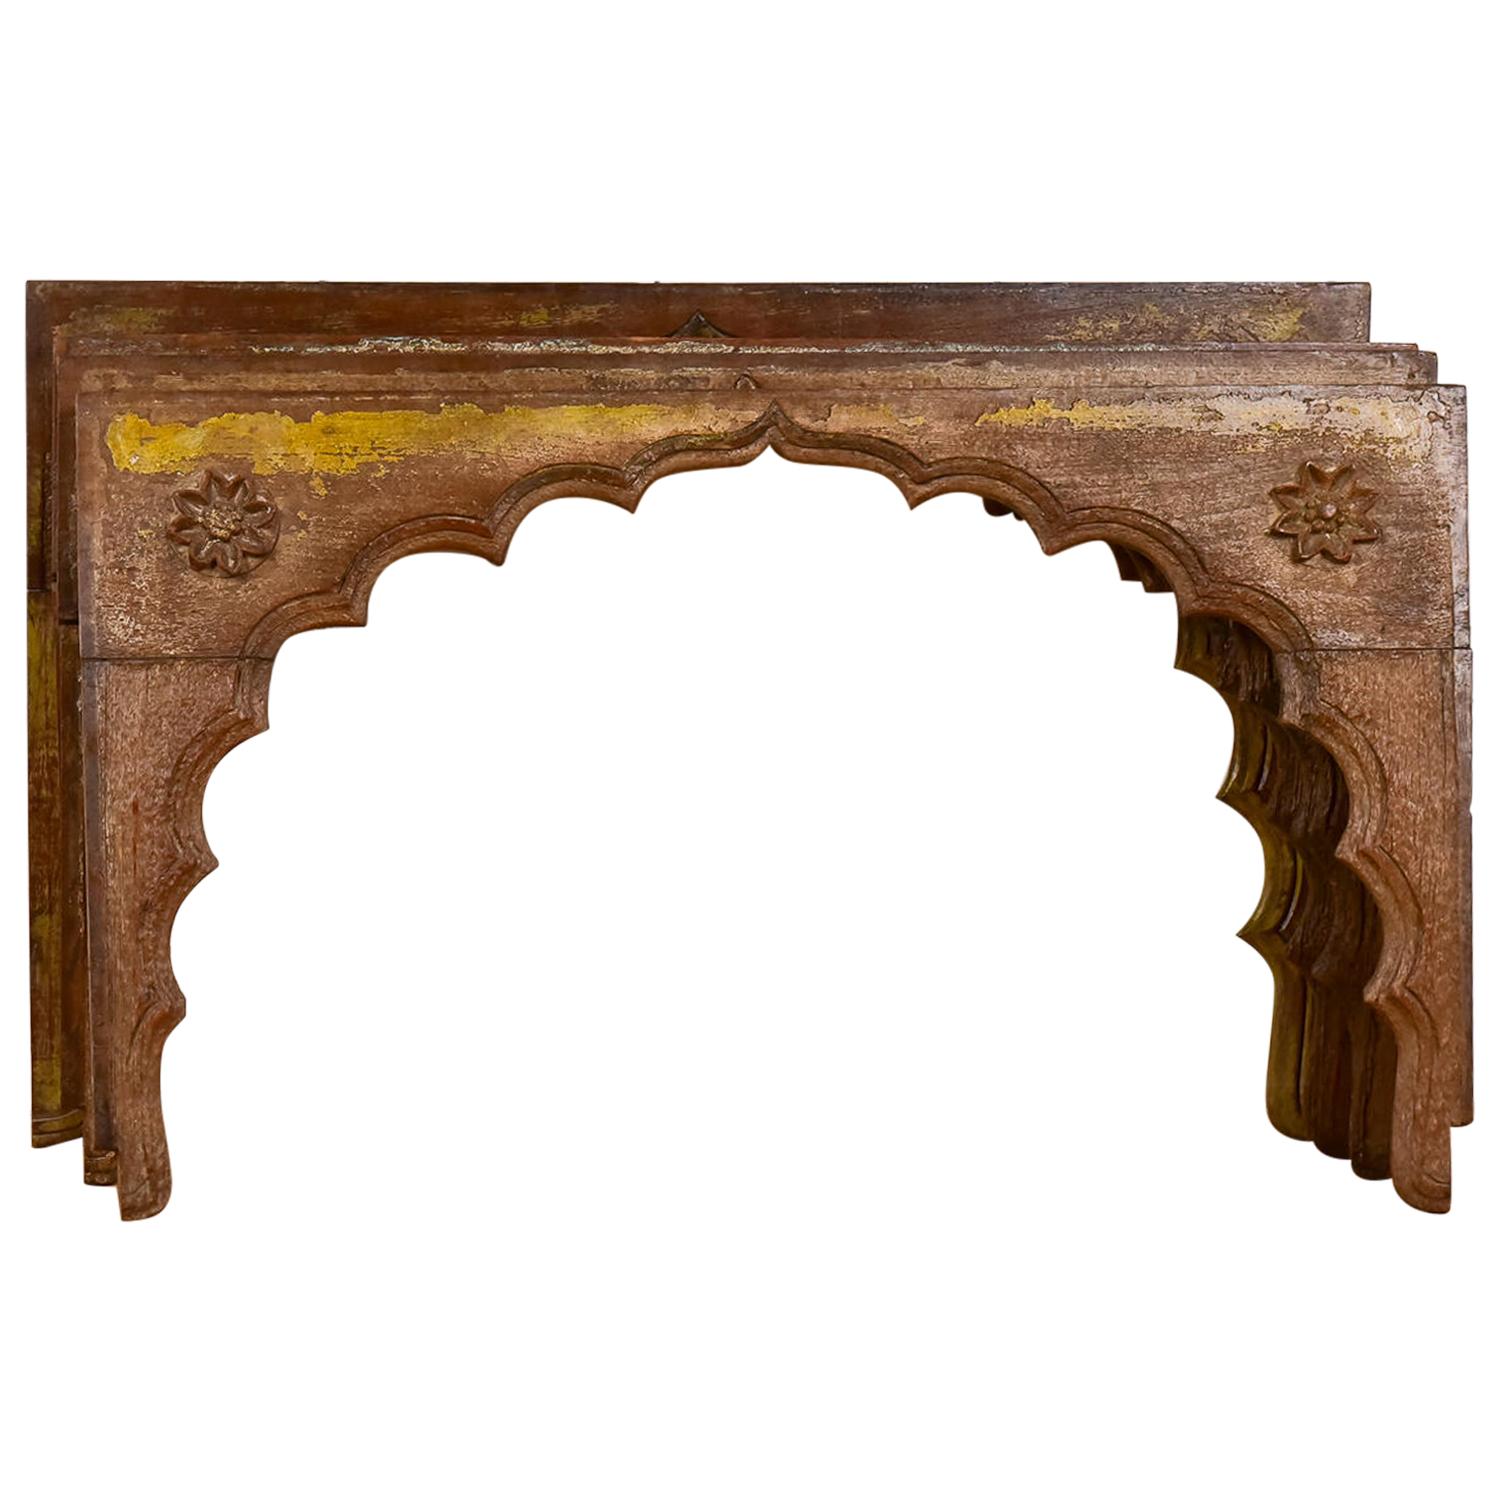 Reclaimed Mihrab Arches with Flower Motif, 20th Century For Sale